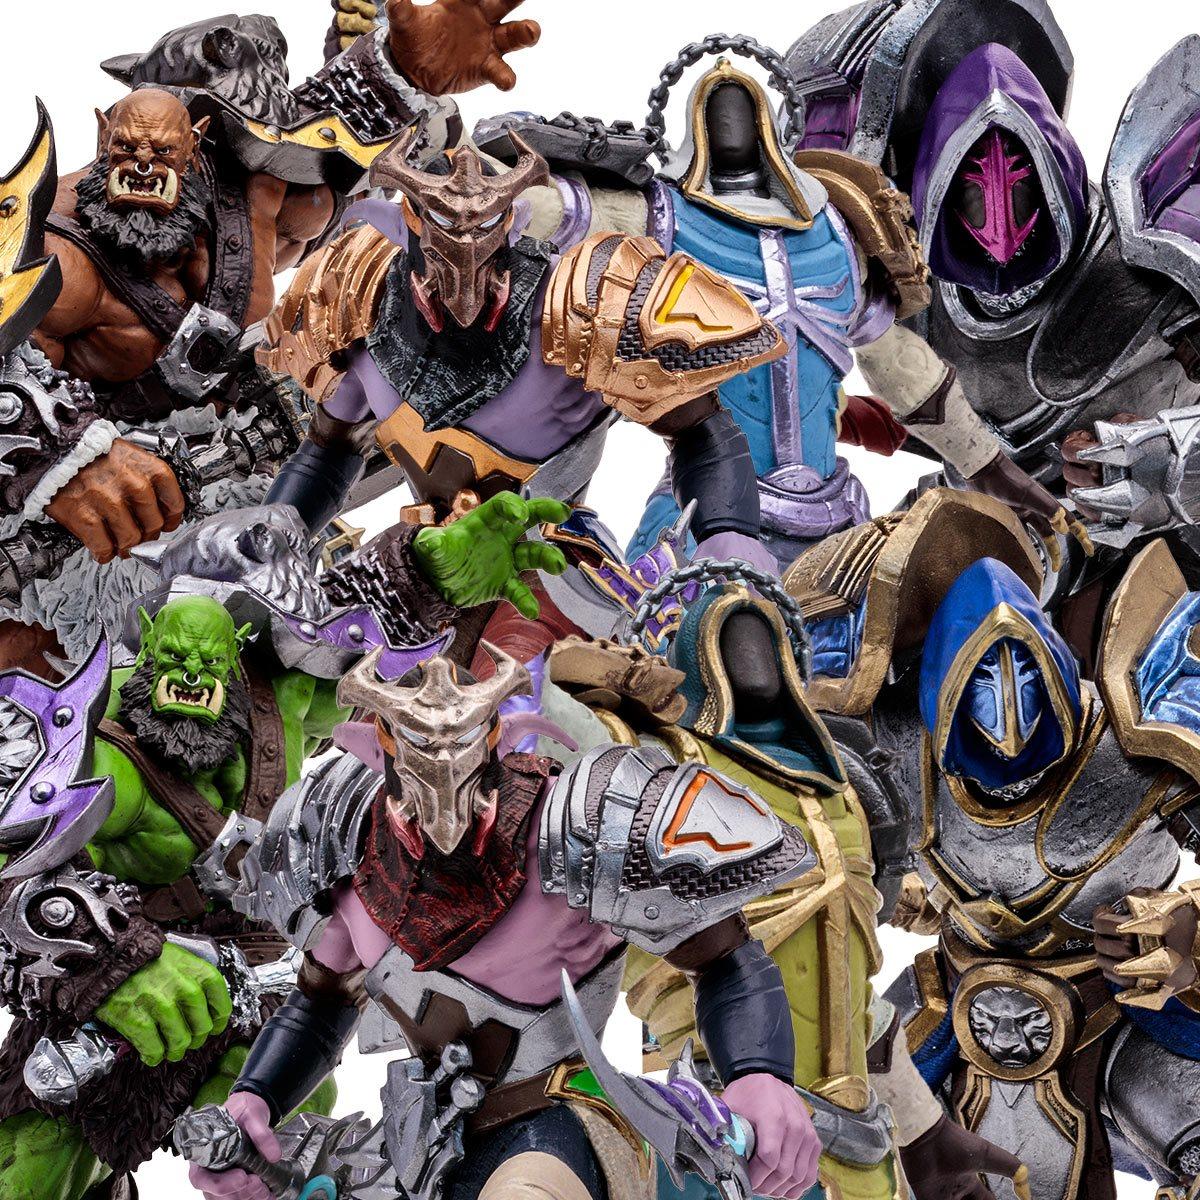 The First World Of Warcraft Figures Launch From Mcfarlane Toys For